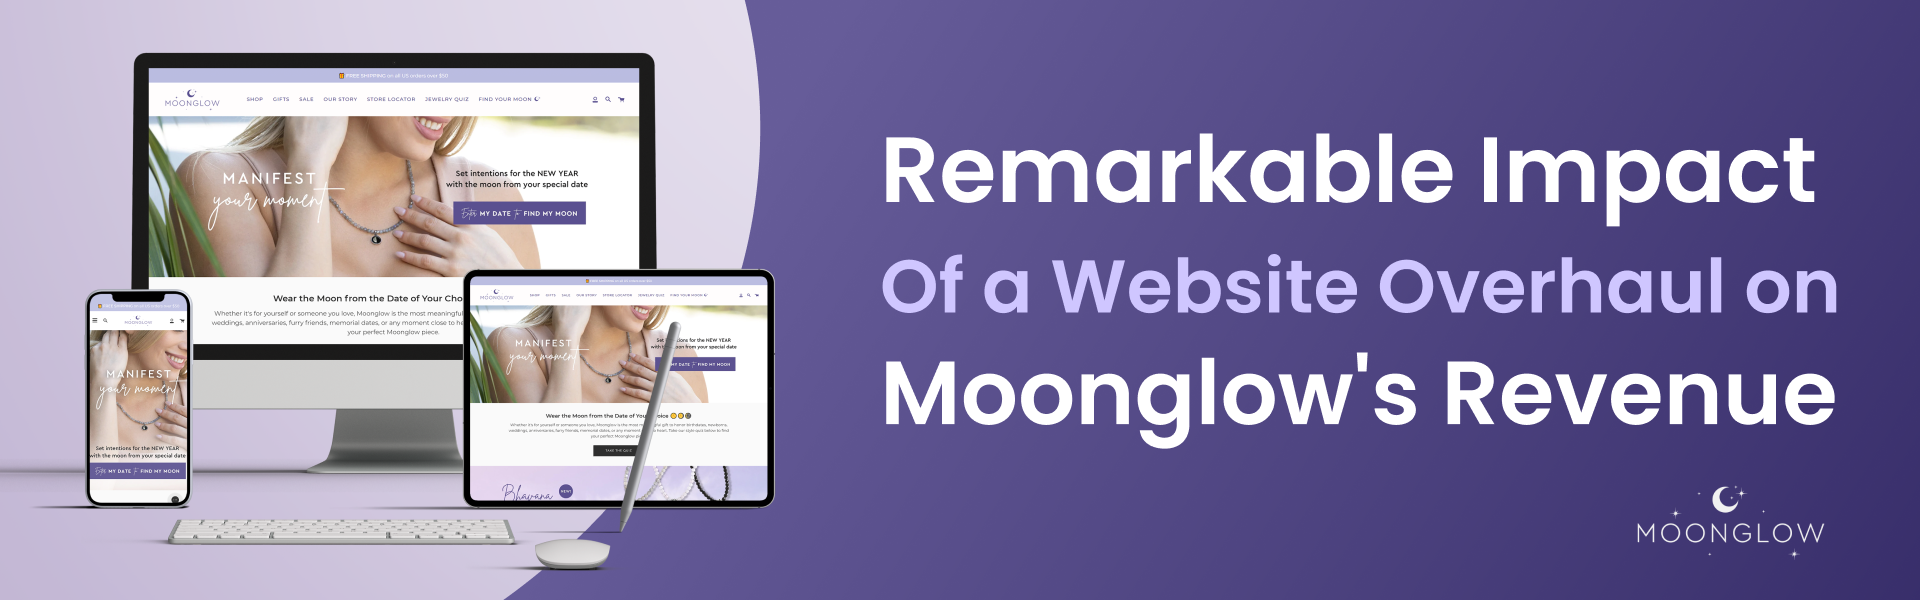 Remarkable impact of a website overhaul on Moonglow's revenue